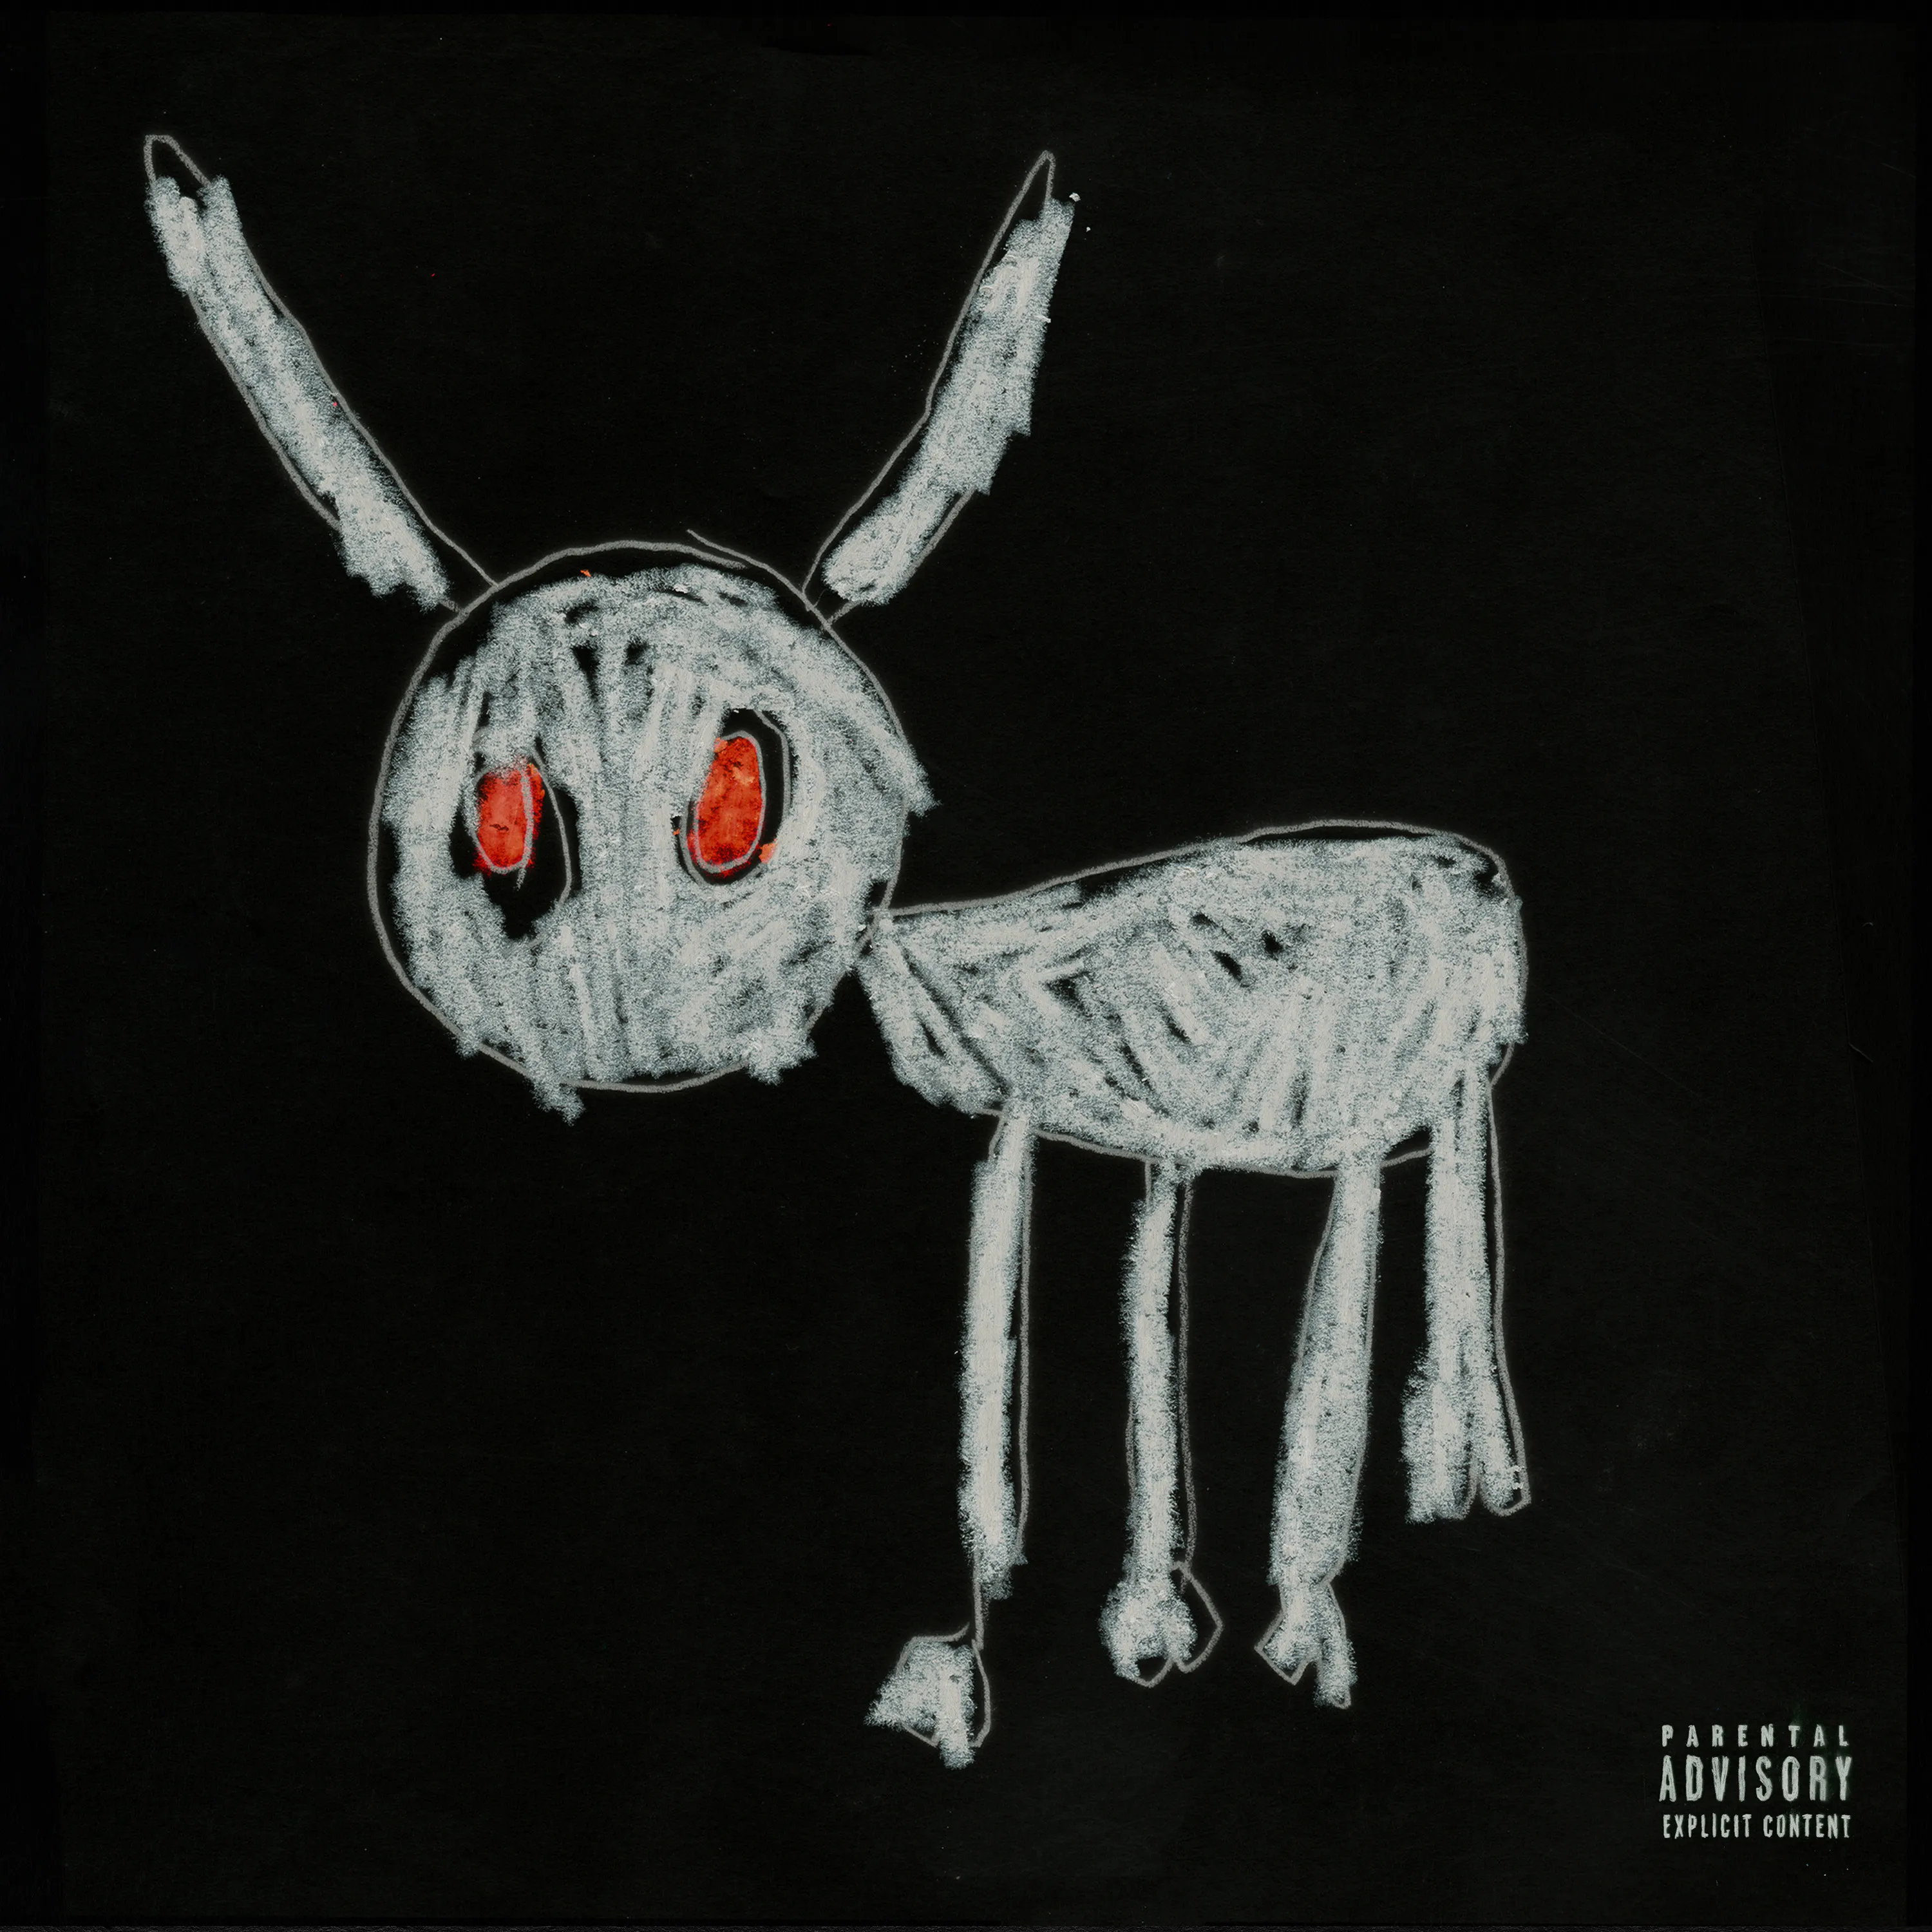 Drake’s For All the Dogs album cover drawn by his five year-old son Adonis in crayon depicts a dog on a black background.